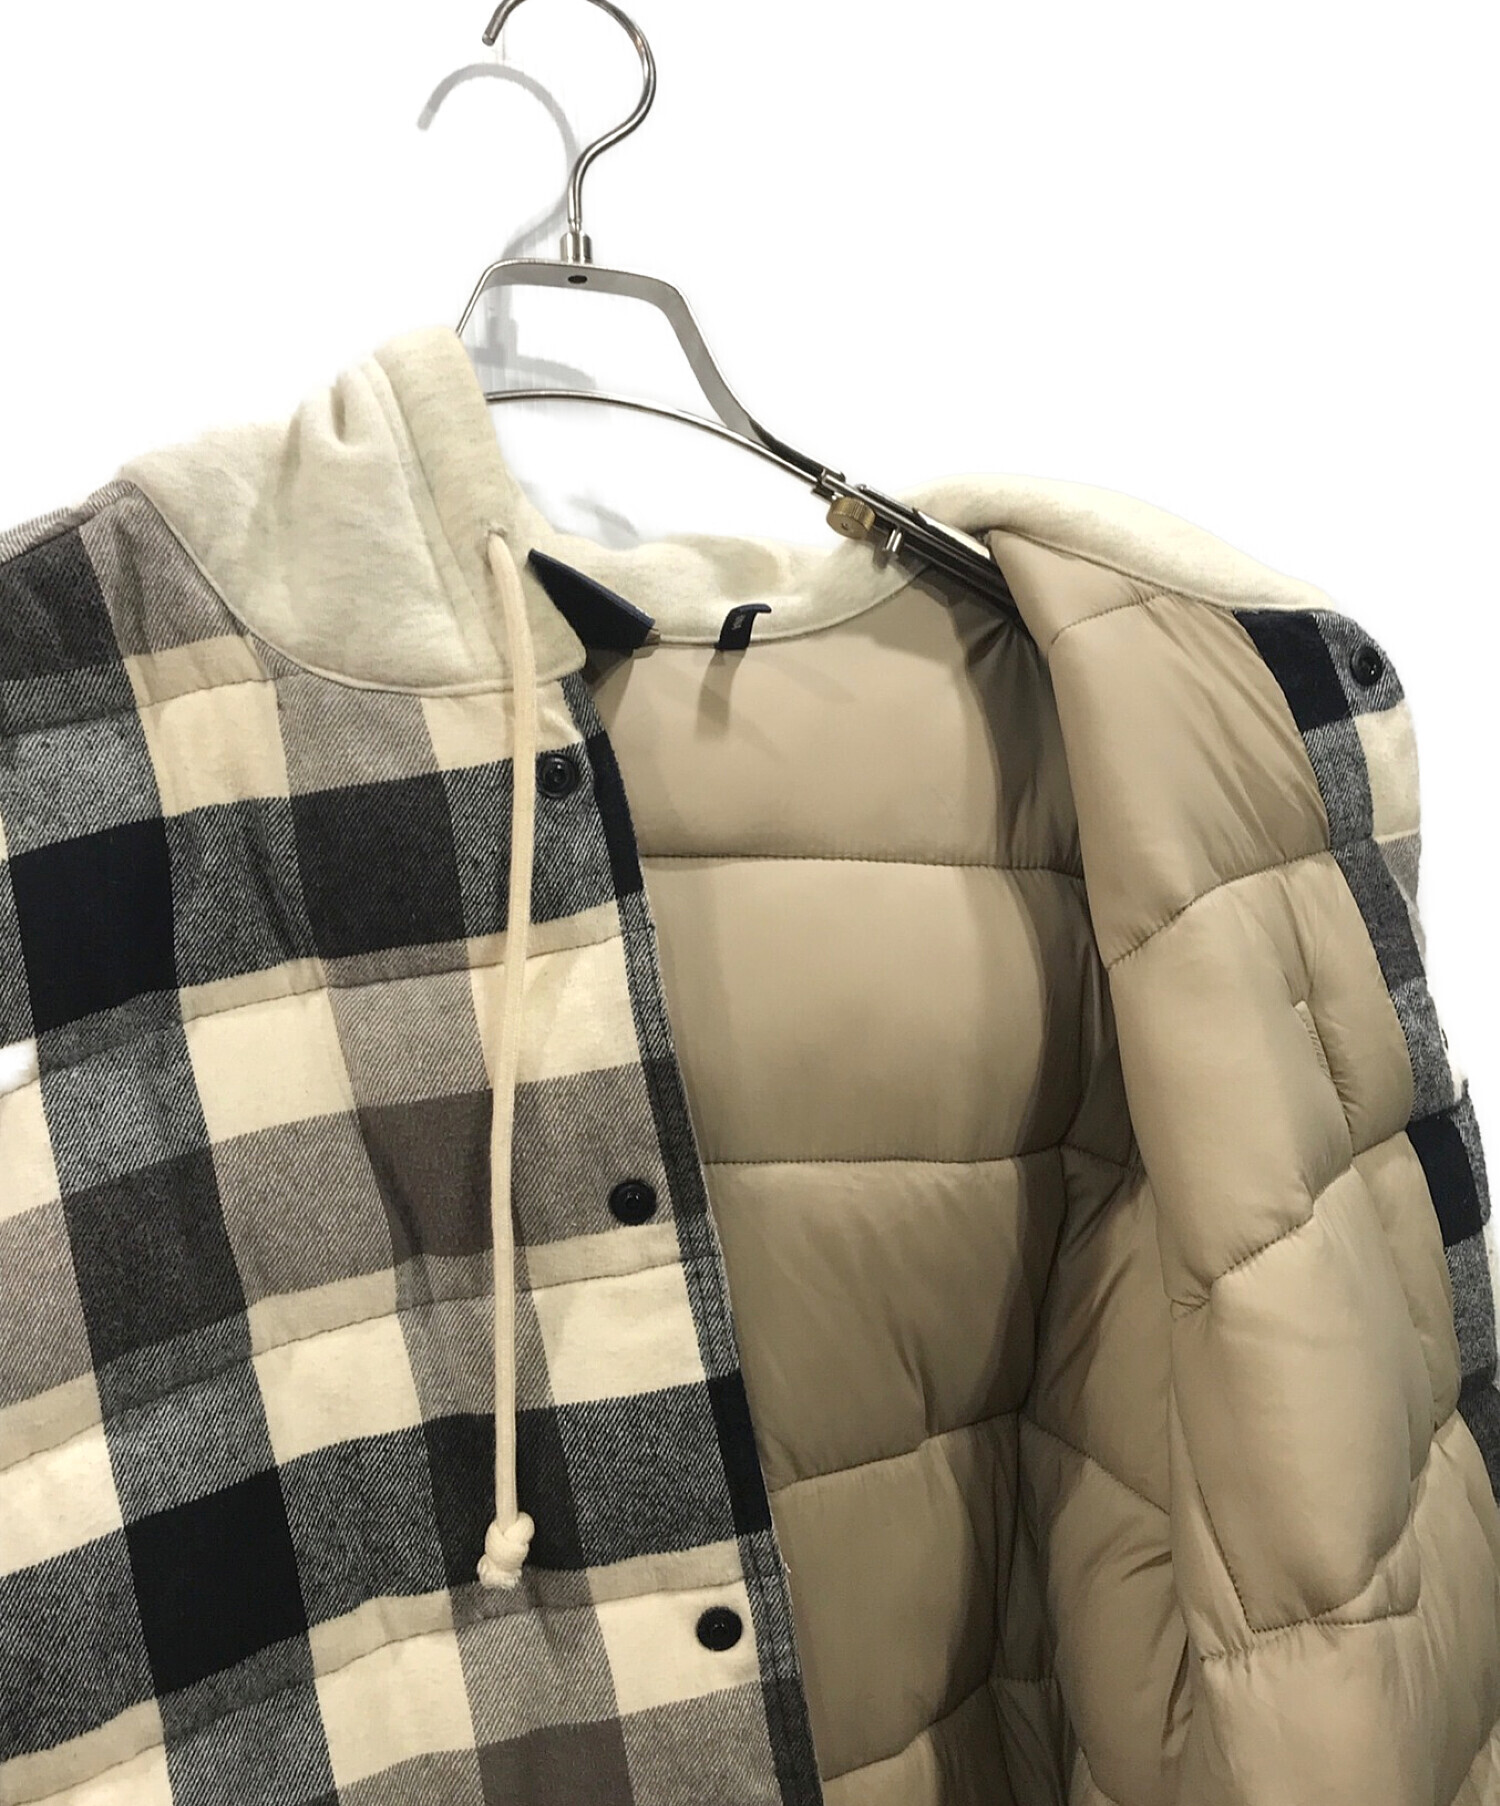 KITH キスSTERLING QUILTED SHIRT PUFFERフード周り汚れあり